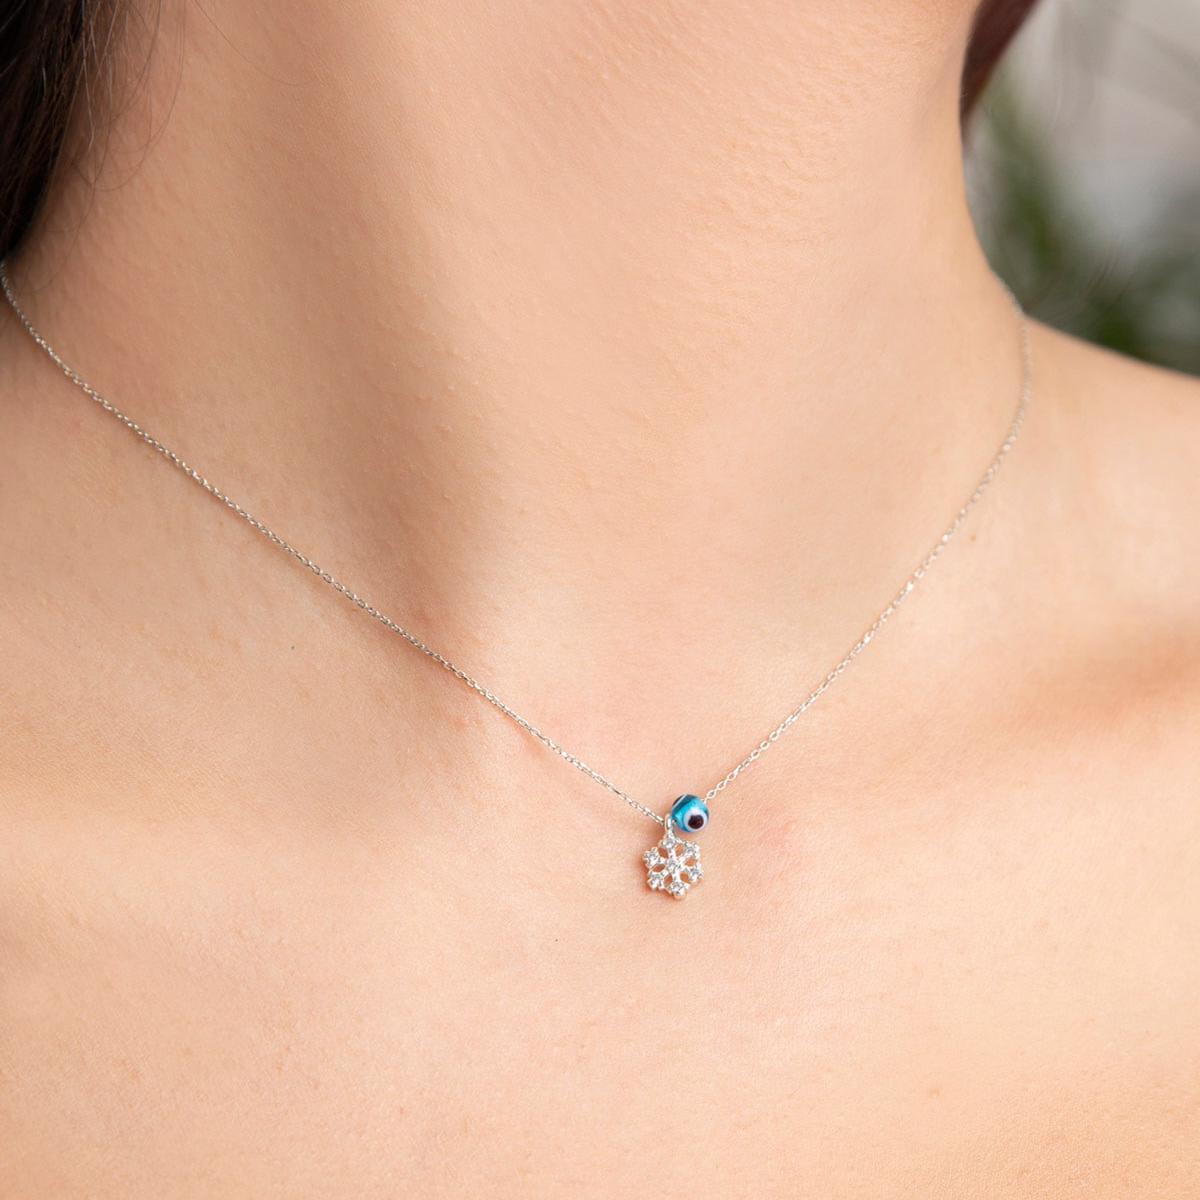 Snowflake Necklace Diamond Evil Eye • Real Evil Eye Necklace - Trending Silver Gifts